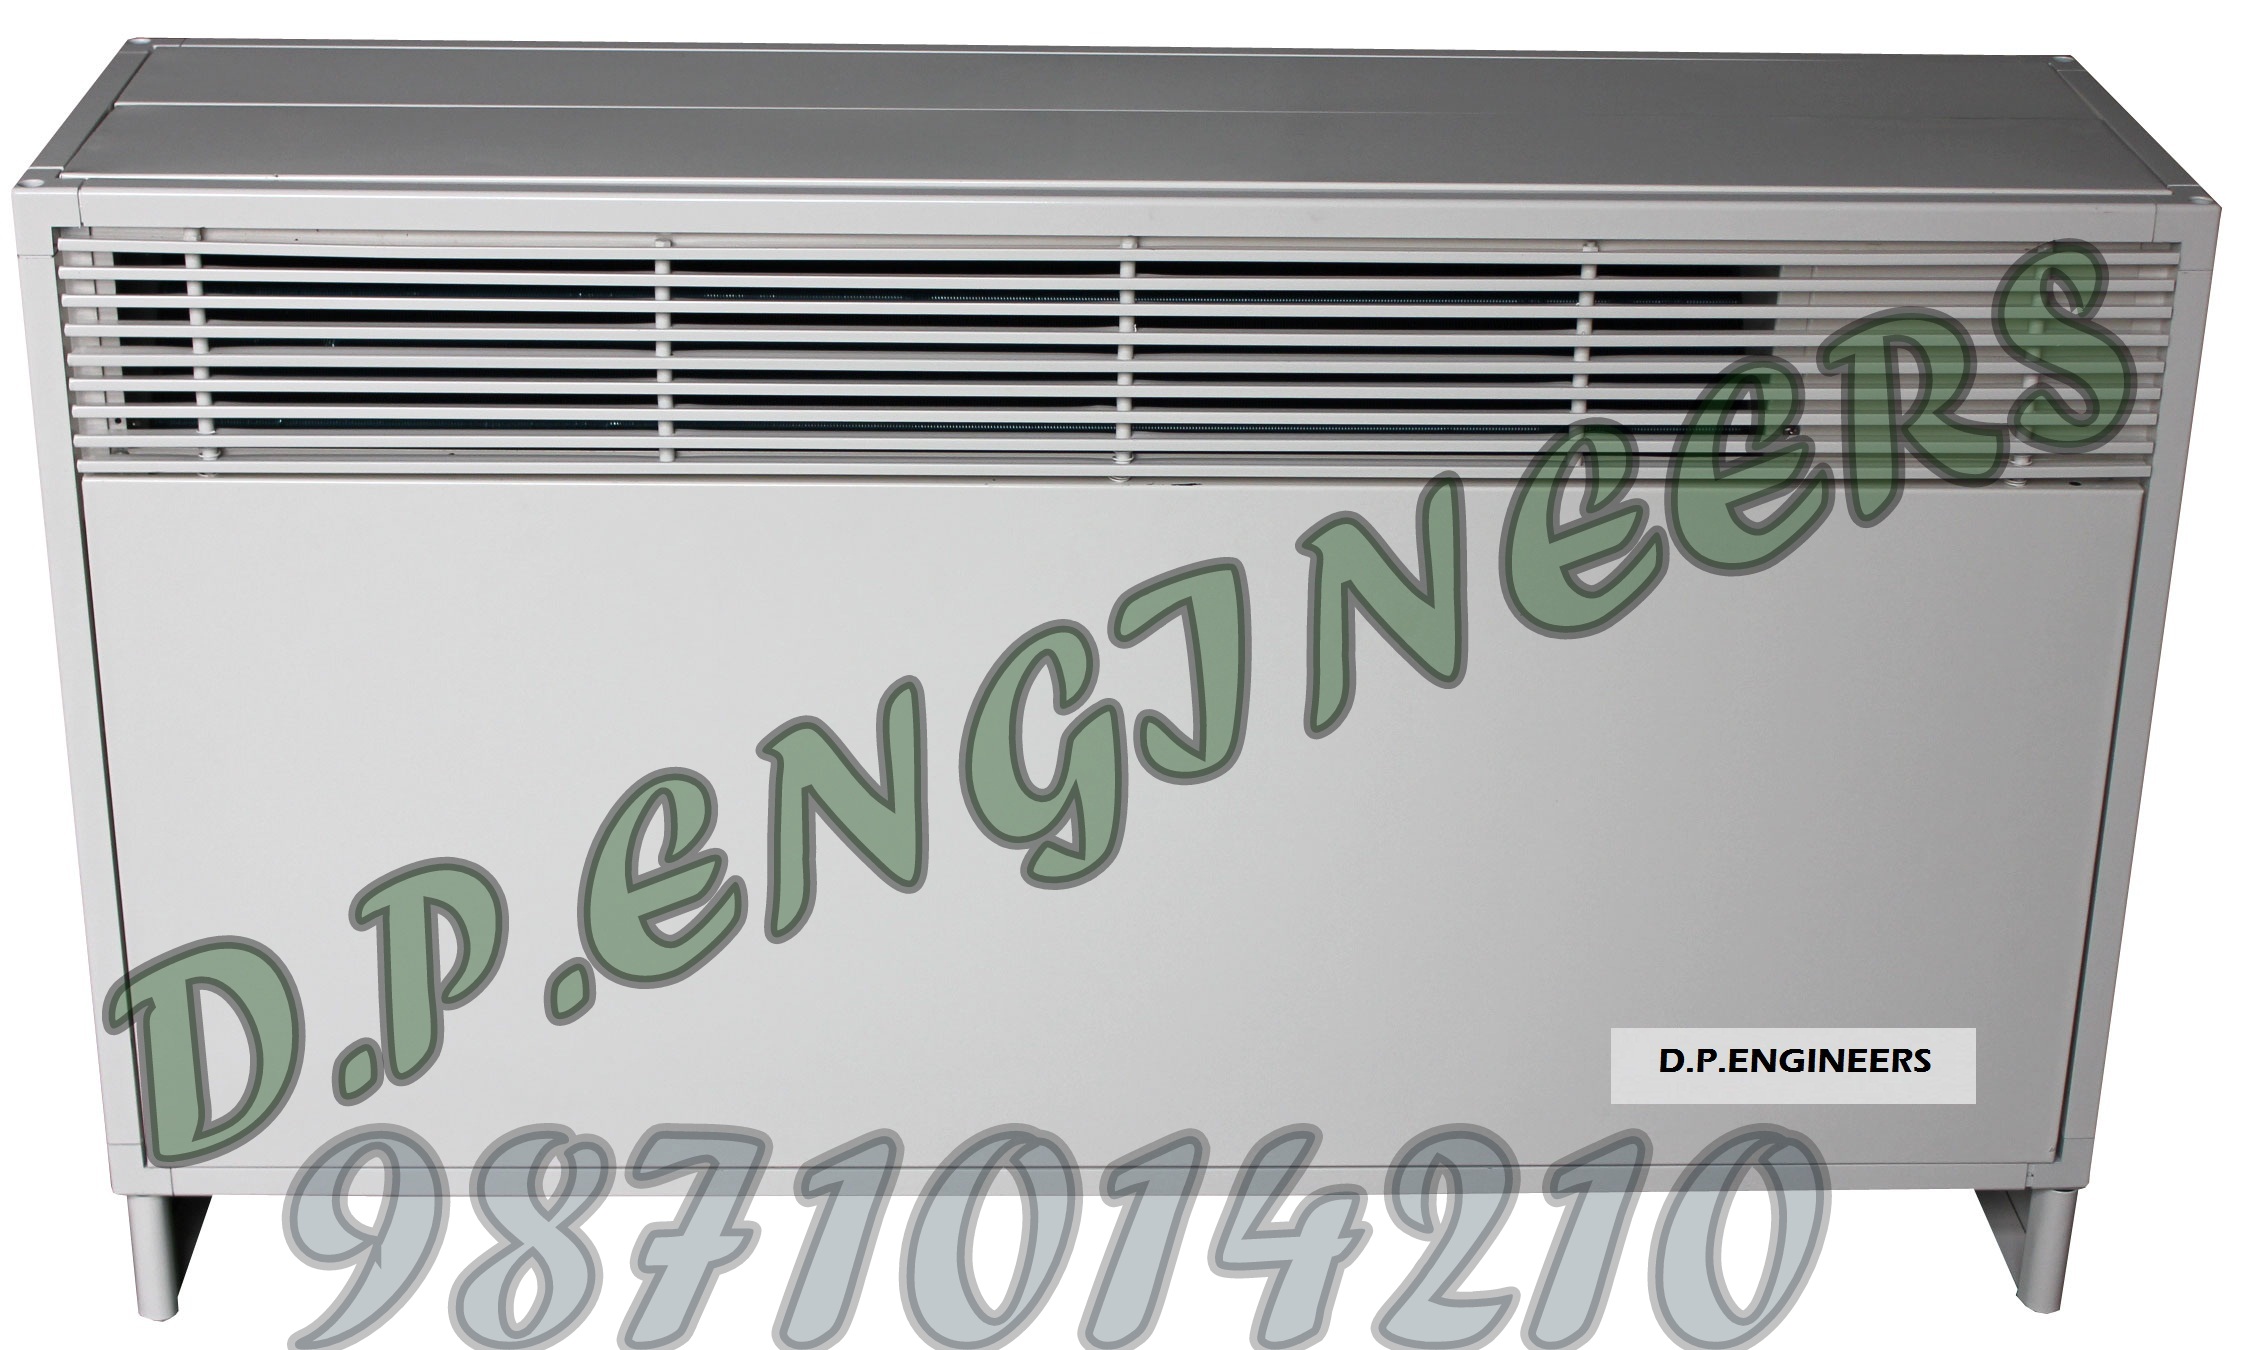 Fan Coil Unit Manufacturer Supplier Wholesale Exporter Importer Buyer Trader Retailer in NR. Aggarwal Sweet Delhi India